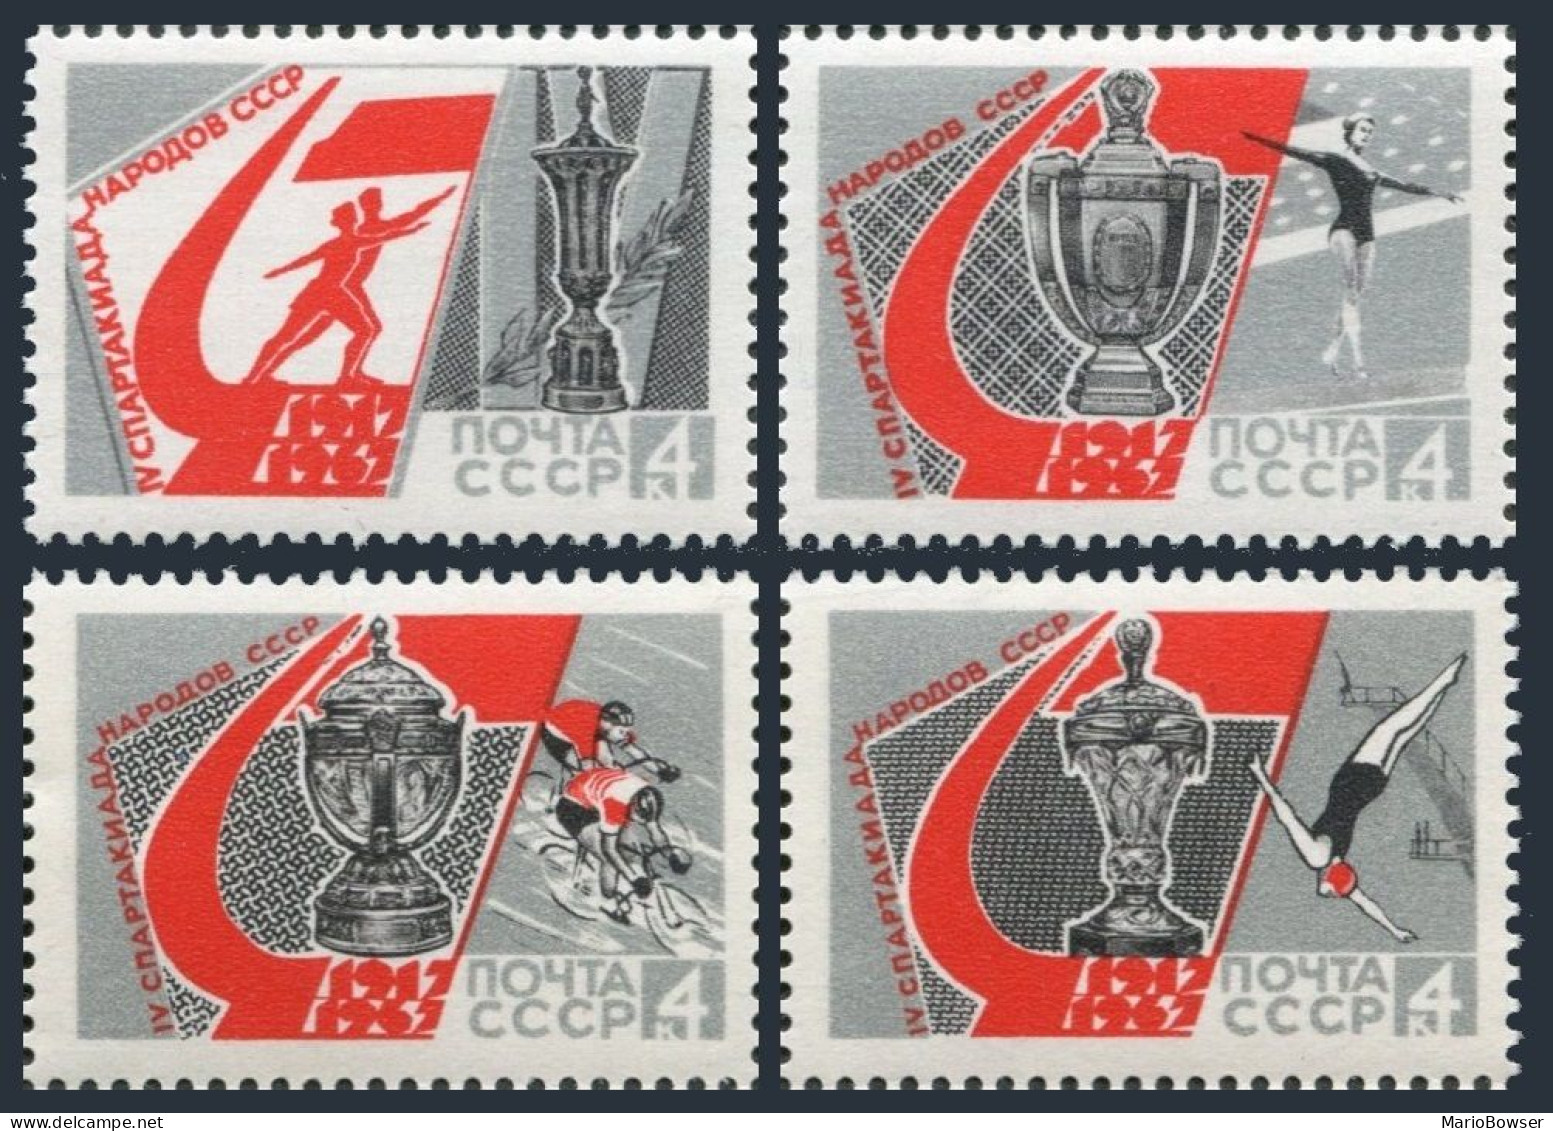 Russia 3337-3340a Pairs, MNH. Michel 3357-3360. Spartacist Games, 1967. - Unused Stamps